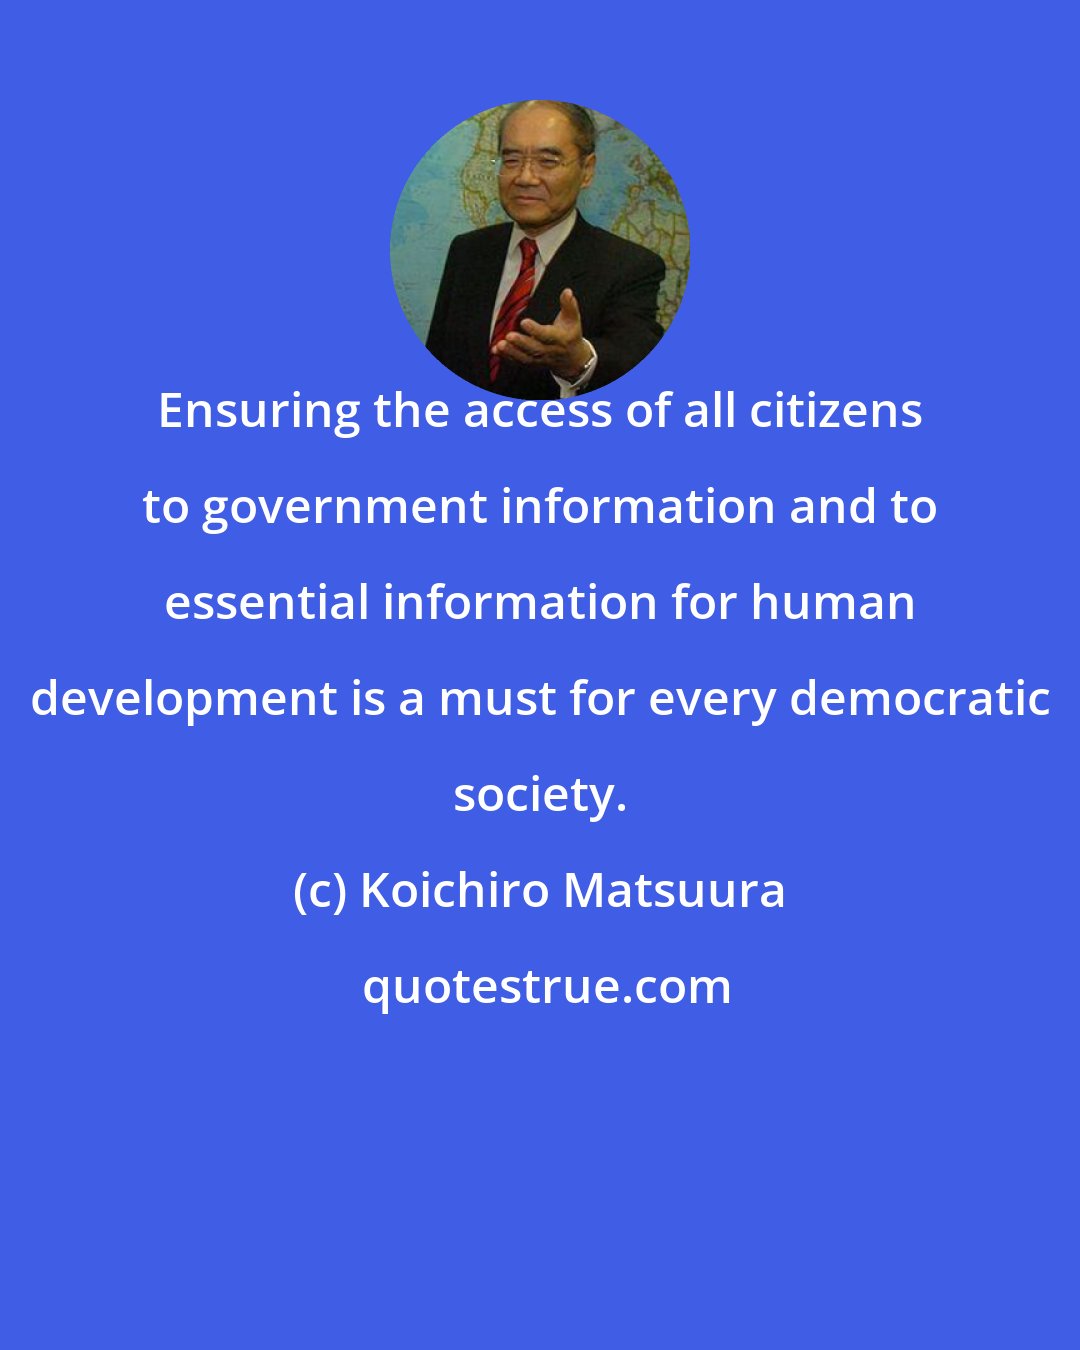 Koichiro Matsuura: Ensuring the access of all citizens to government information and to essential information for human development is a must for every democratic society.